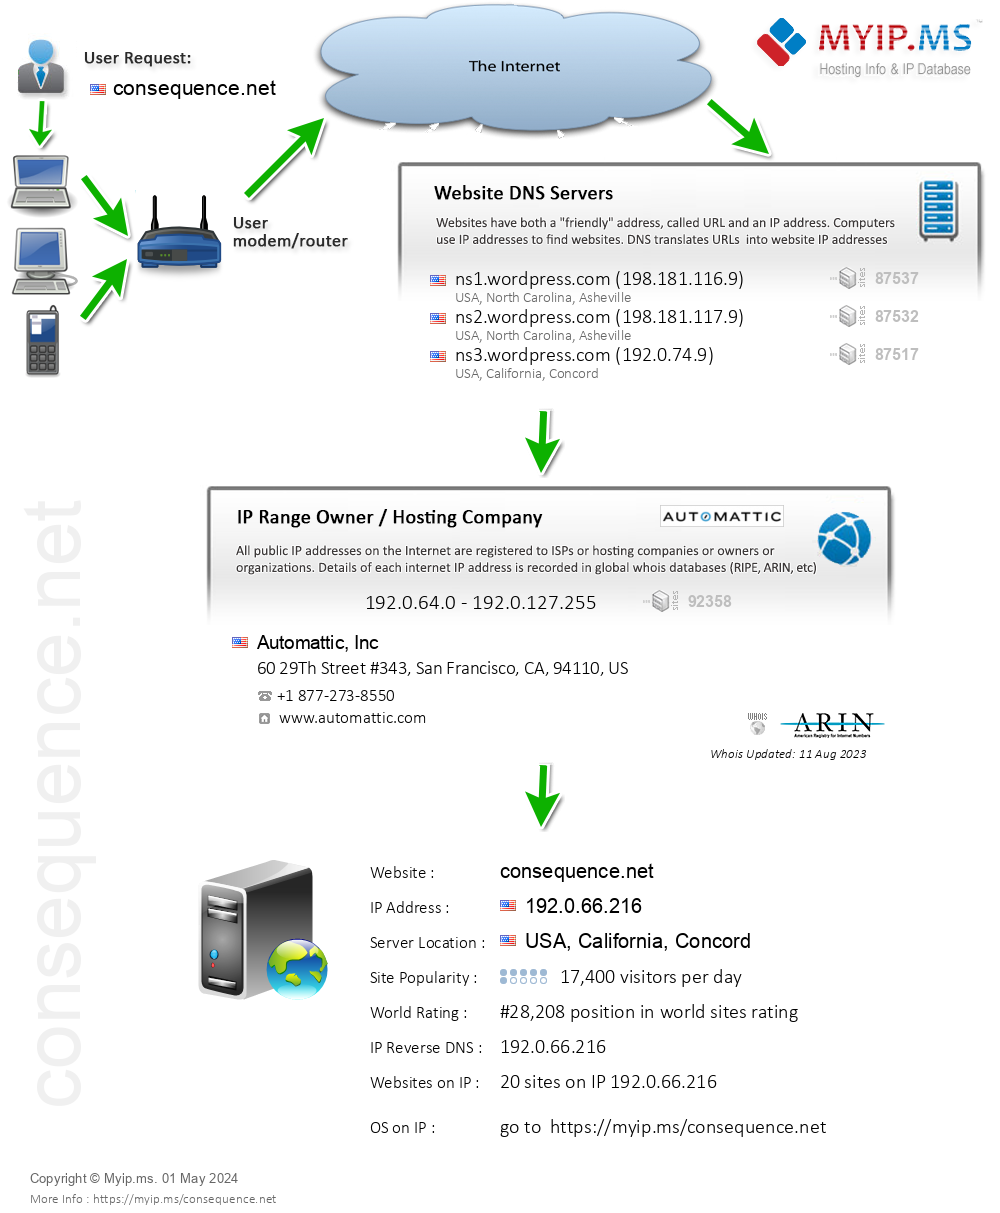 Consequence.net - Website Hosting Visual IP Diagram